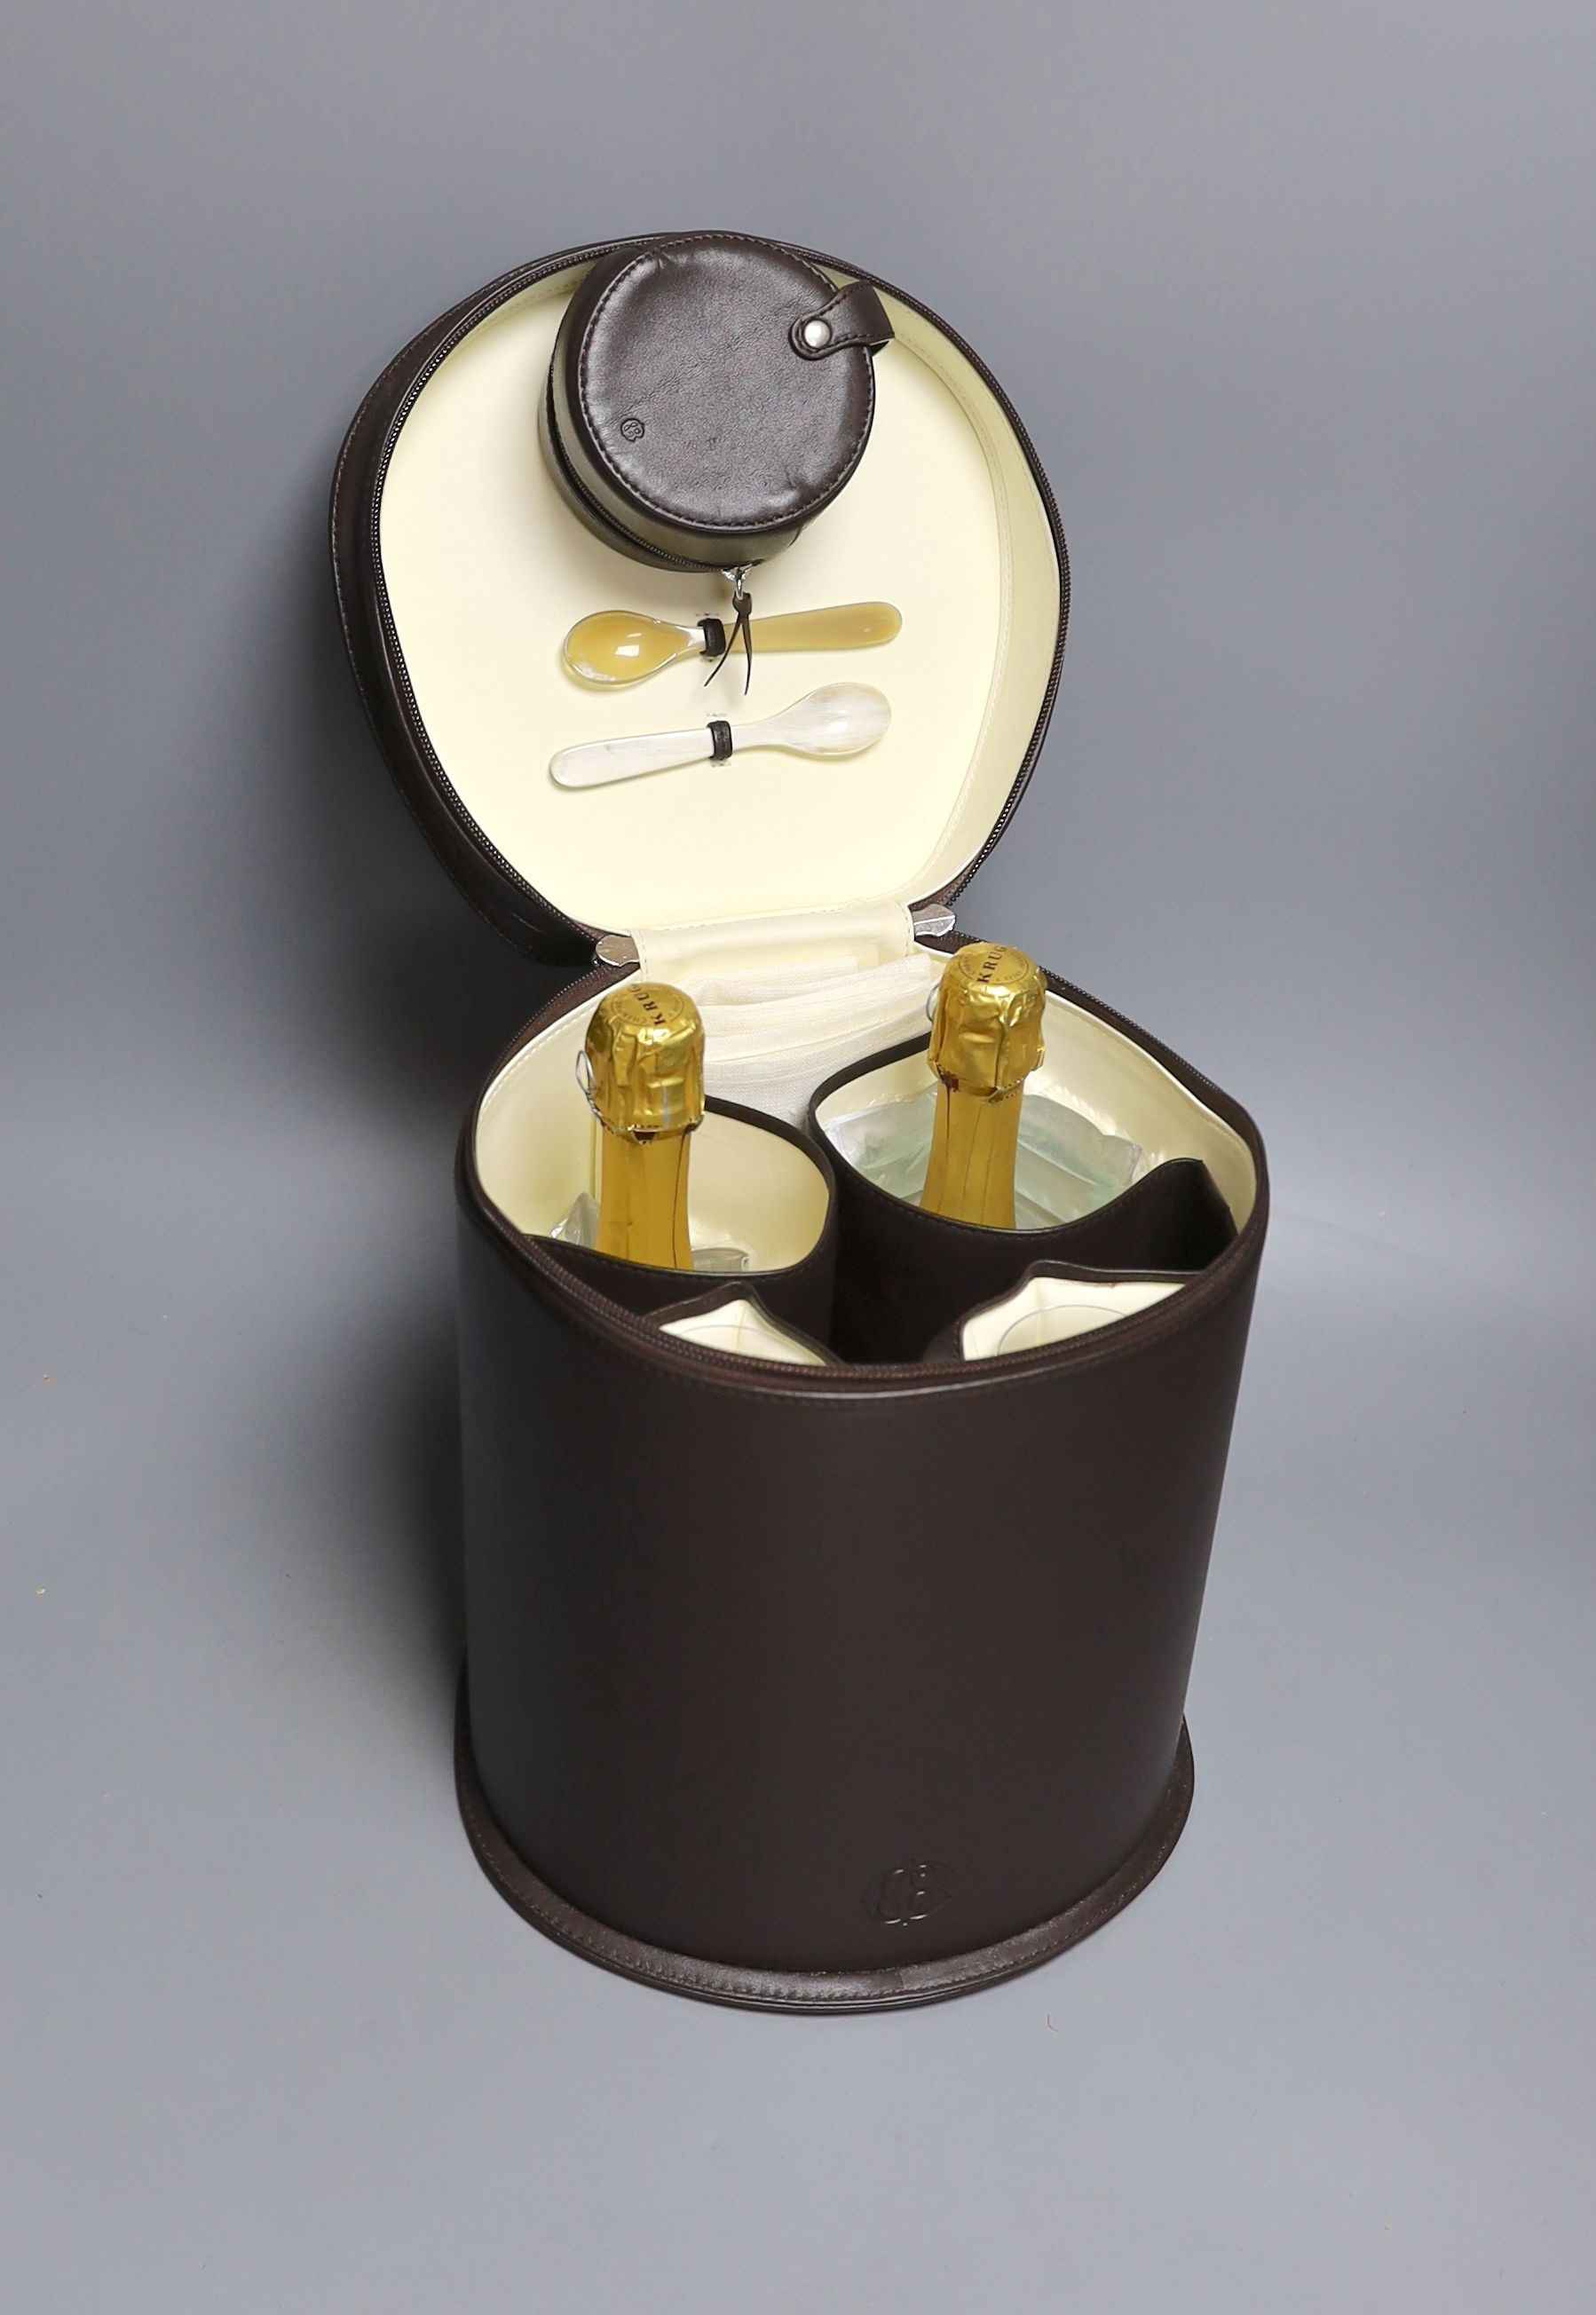 A Connolly leather Krug champagne carrier with dust cover, containing: two half bottles, two champagne chillers, two Krug champagne flutes, two Connolly linen napkins, a leather caviar pouch and two bone caviar spoons